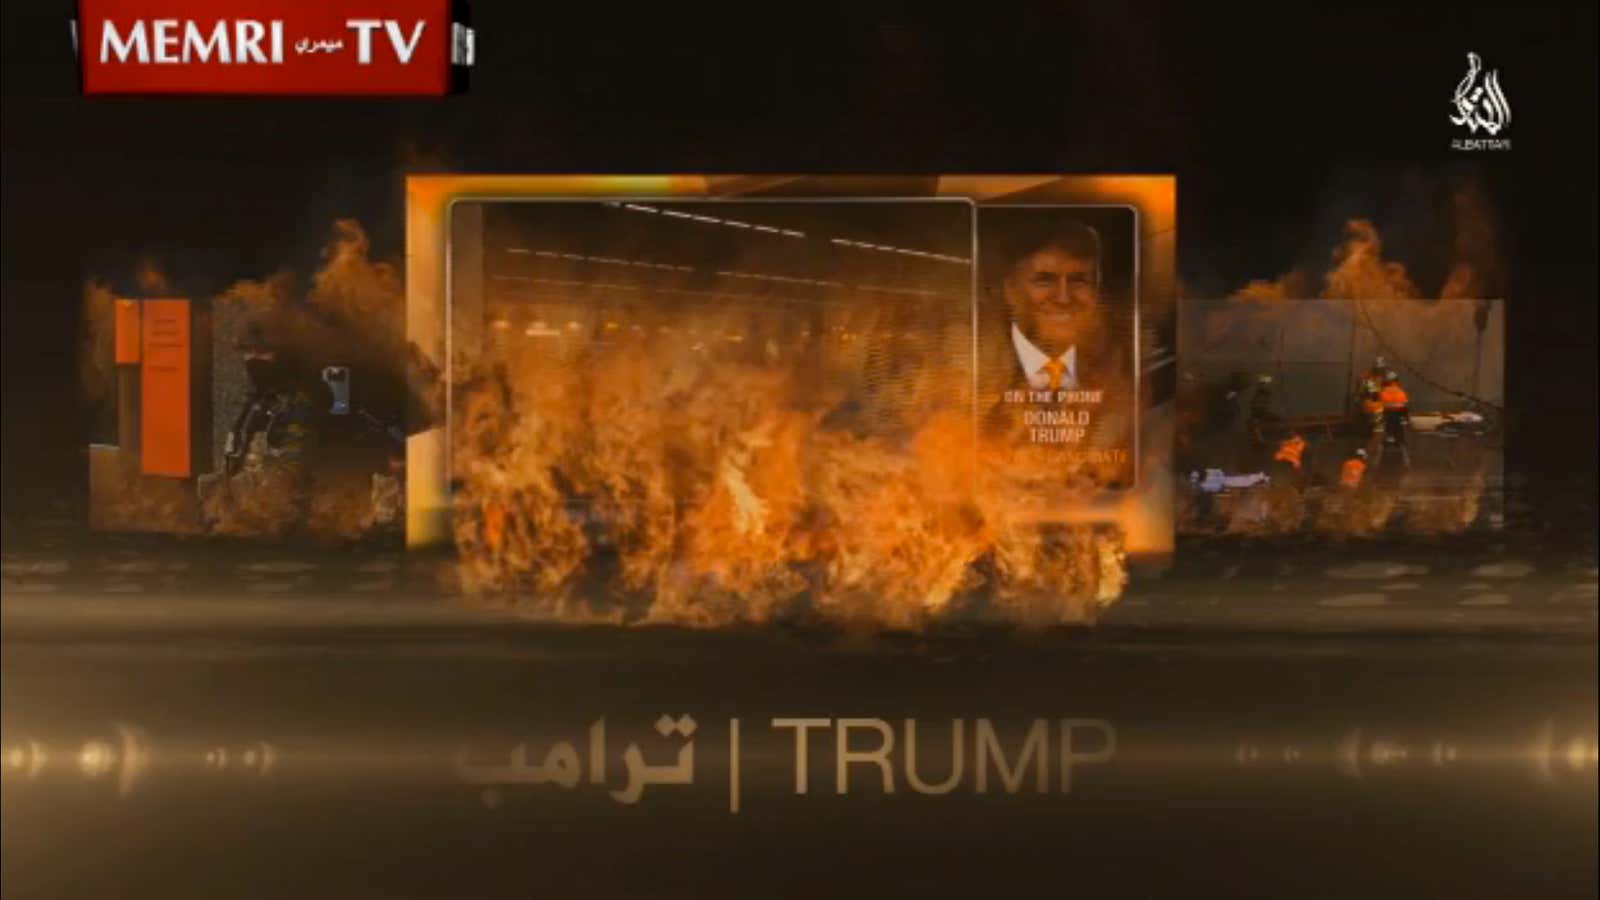 An ISIL propaganda film for the Brussels attacks prominently features Donald Trump